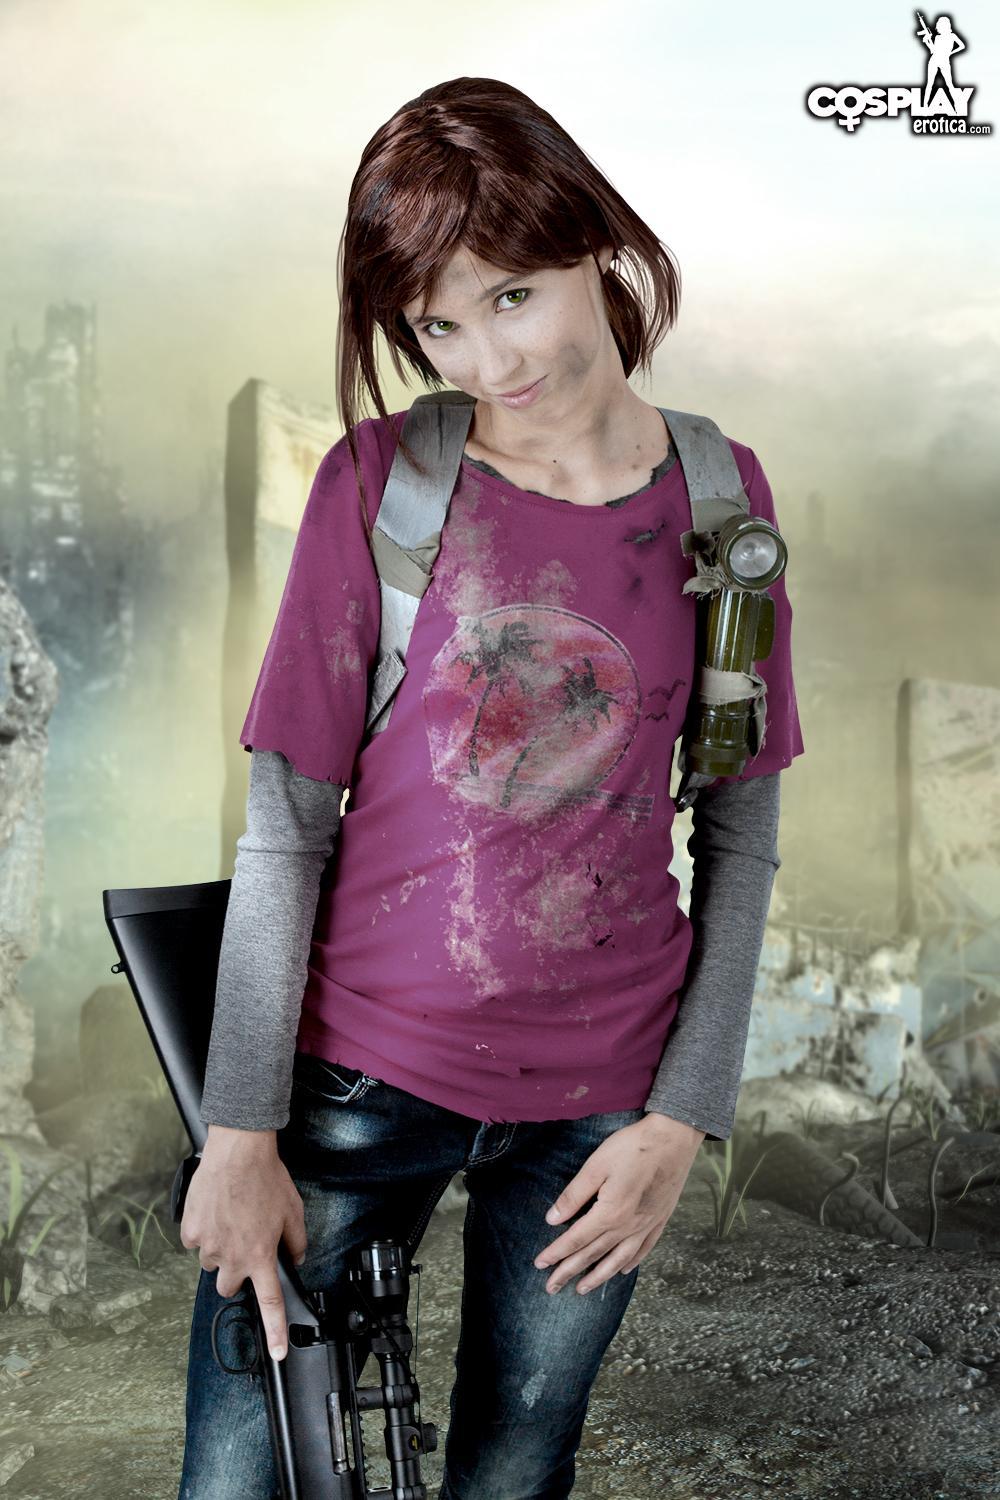 Cute cosplay girl Stacy is going to win the war in Resistance #60007650